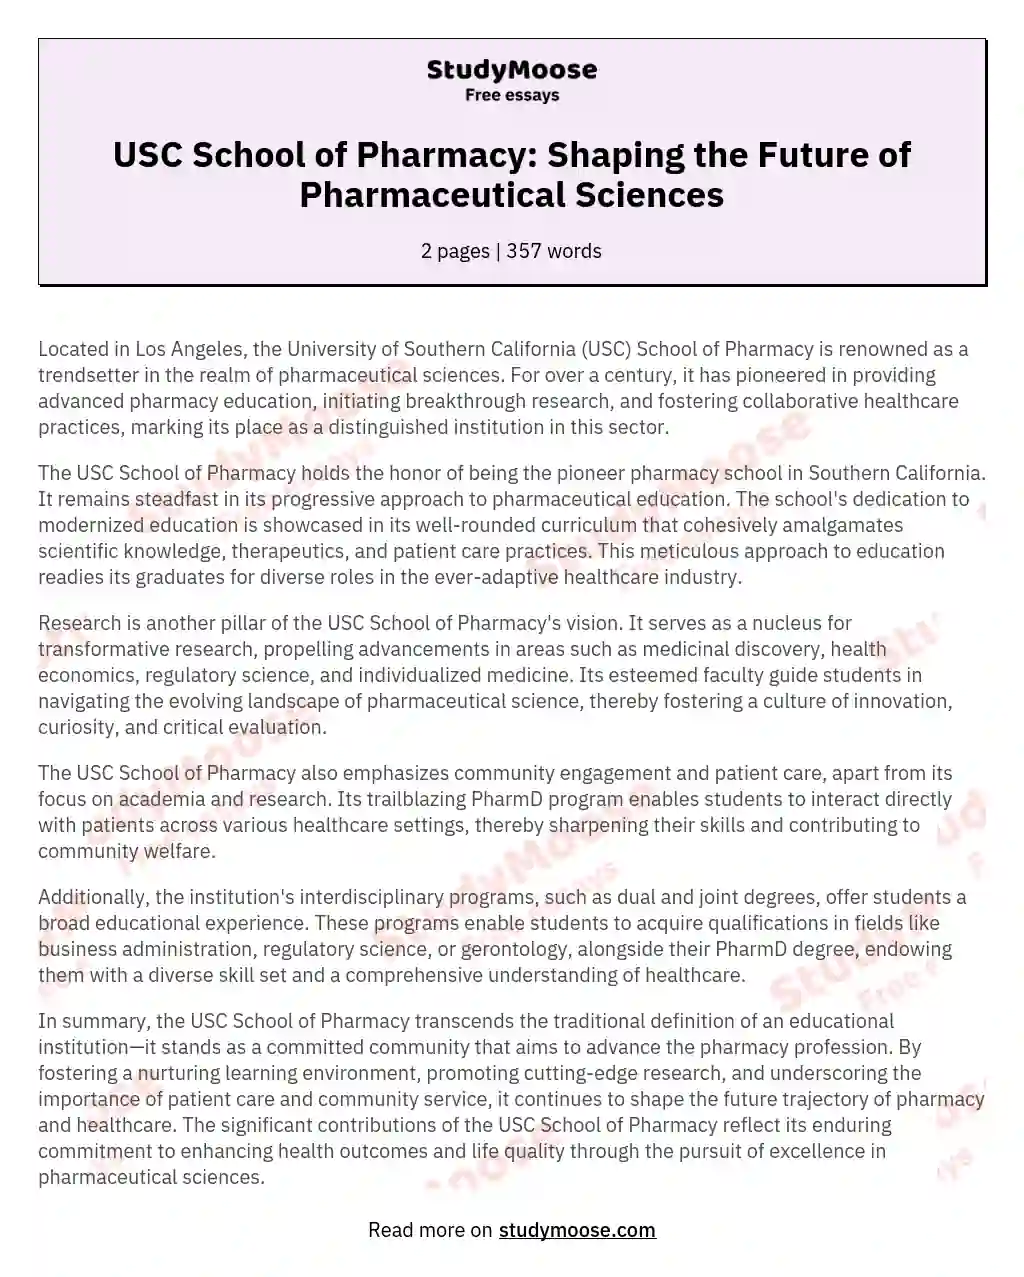 USC School of Pharmacy: Shaping the Future of Pharmaceutical Sciences essay